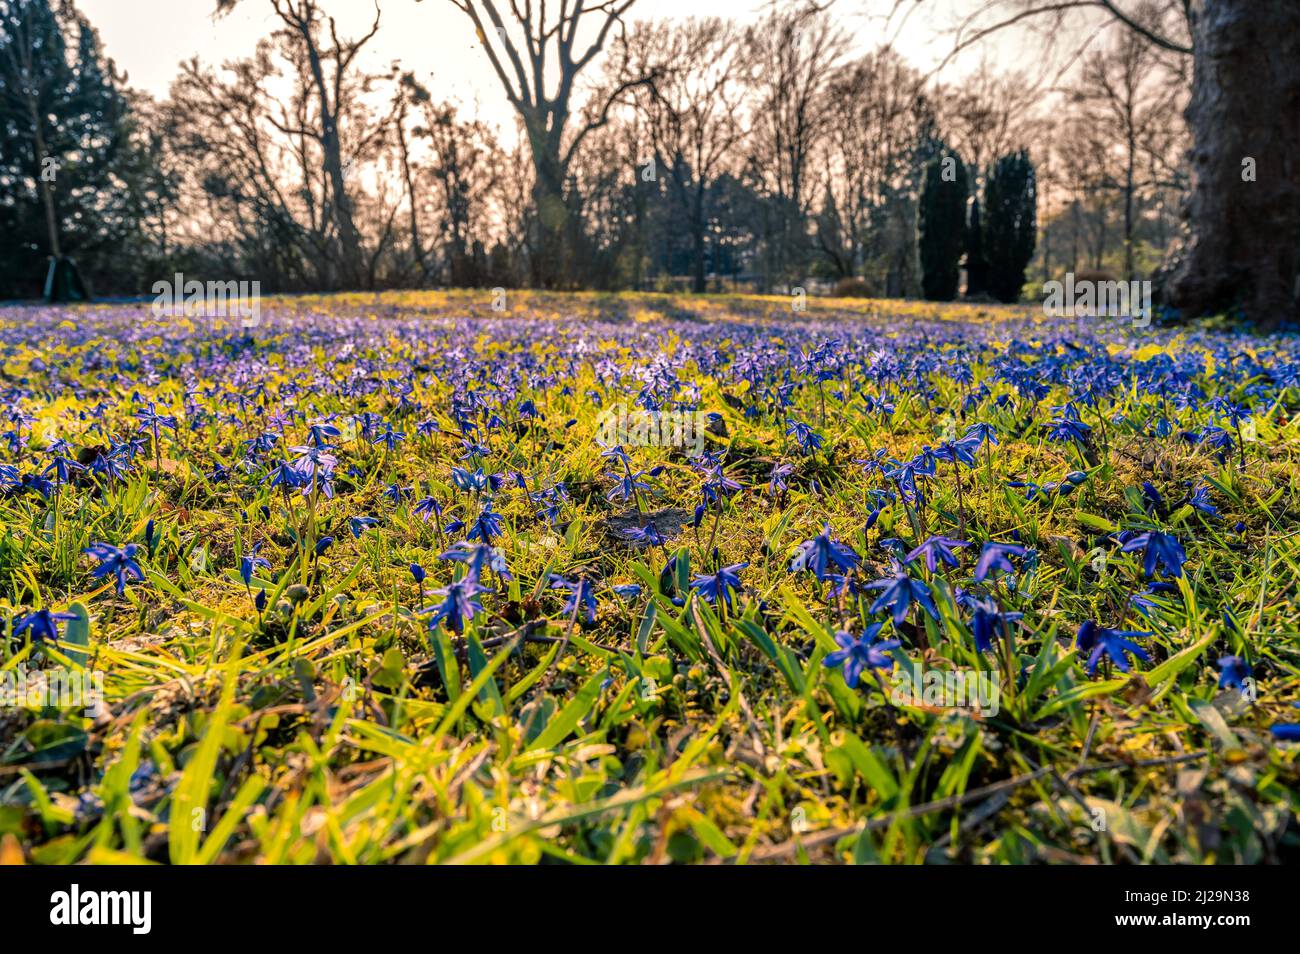 Many squills (Scilla) on the meadow in spring, Hanover, Lower Saxony, Germany Stock Photo